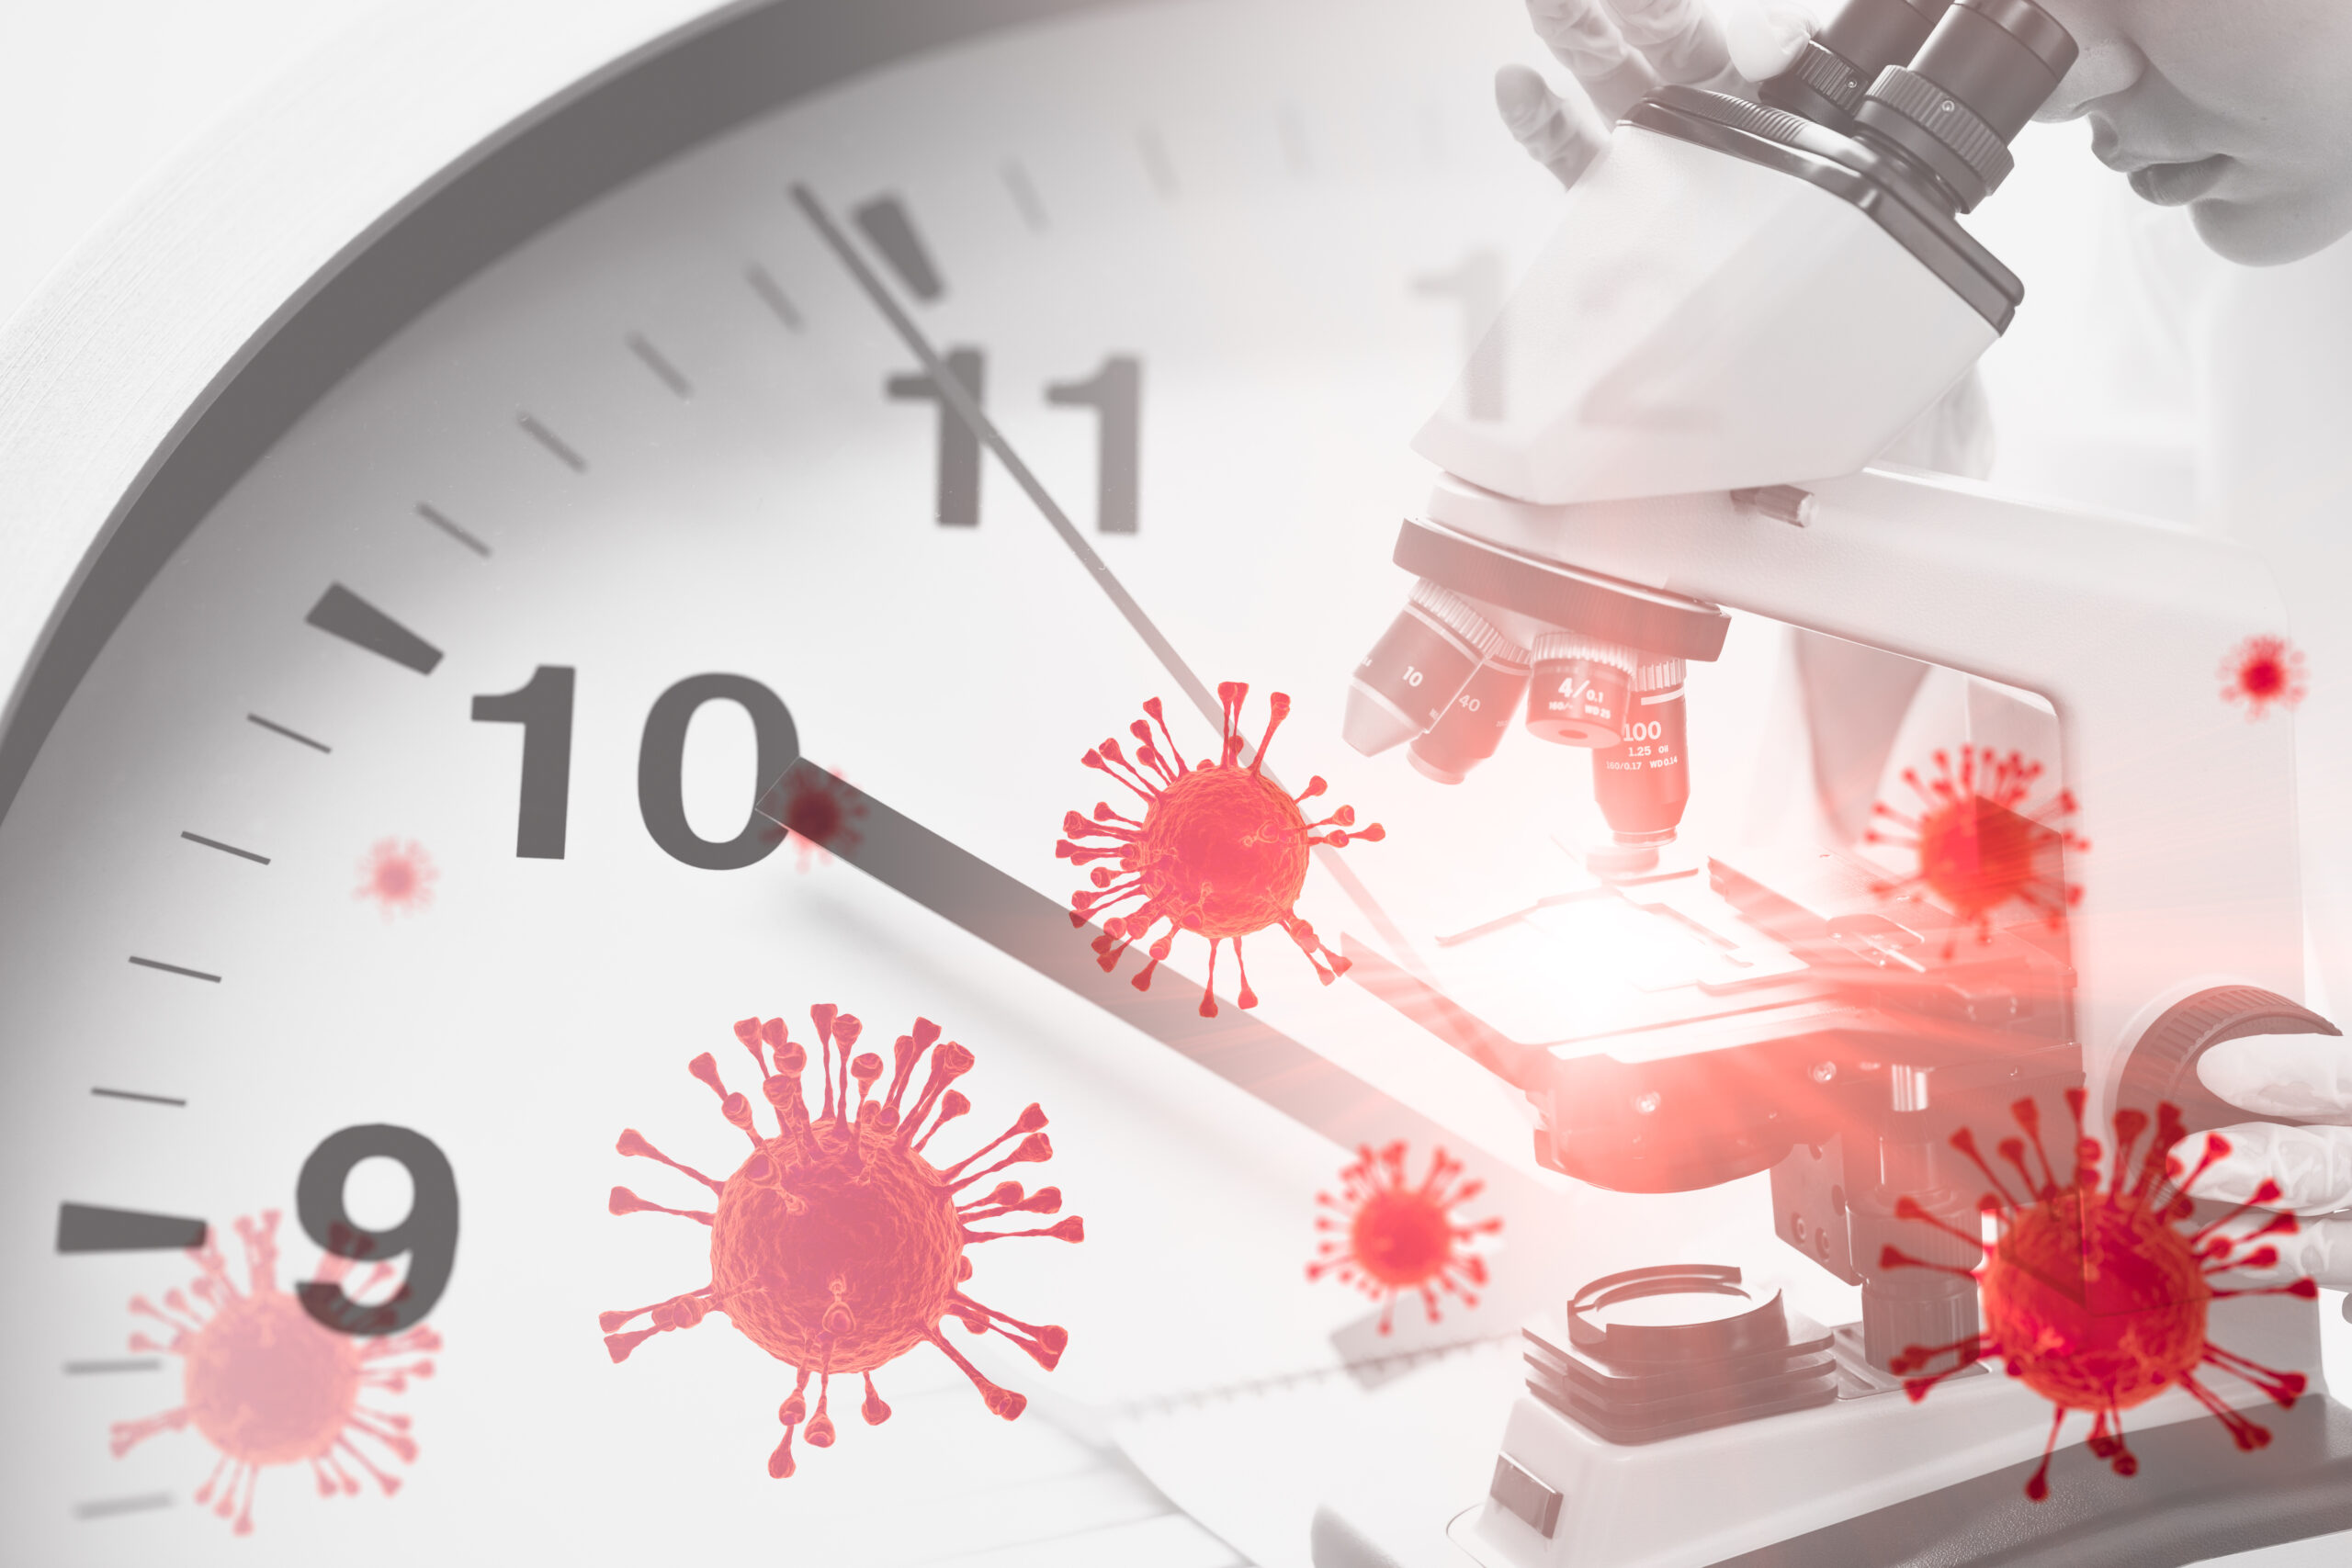 An image of a clock is overlaid with partially transparent COVID-19 cells and a lab worker looking into a microscope